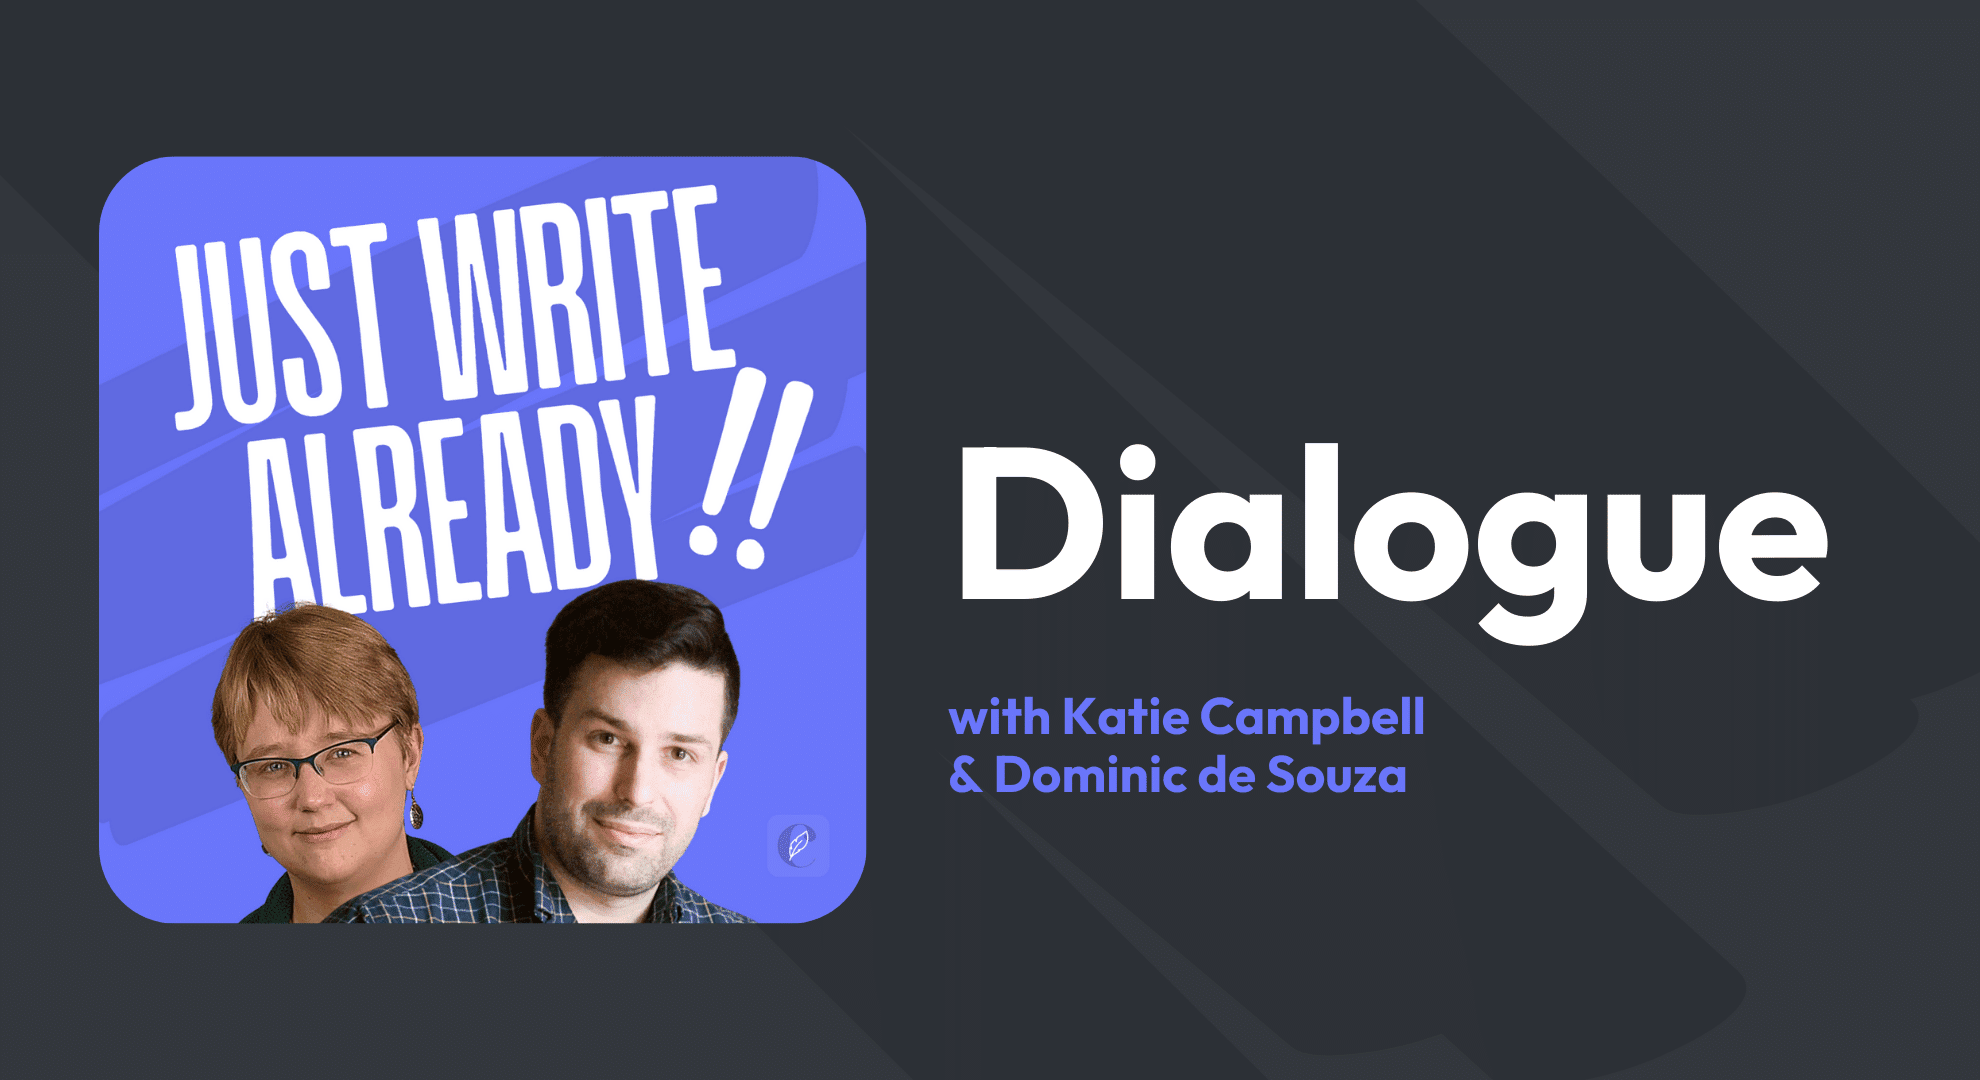 How to make dialogue sound more real and readable